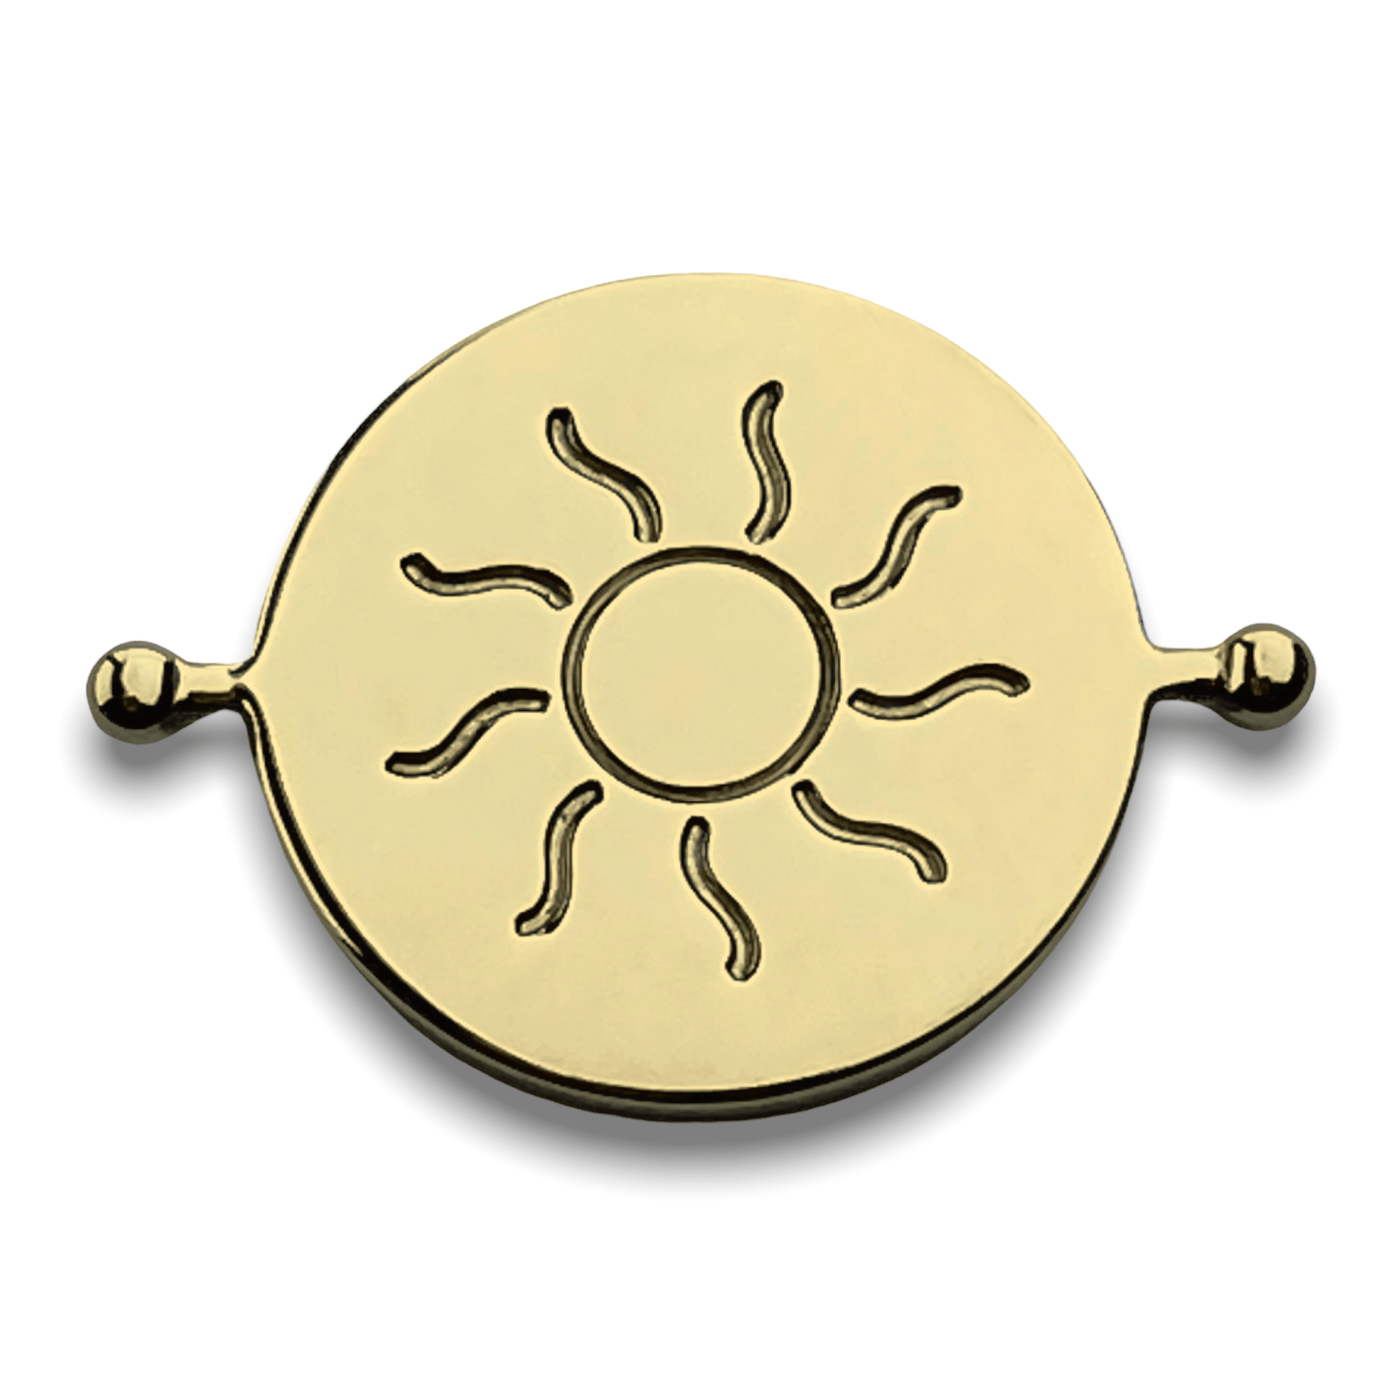 Sun Symbol Element (spin to combine)